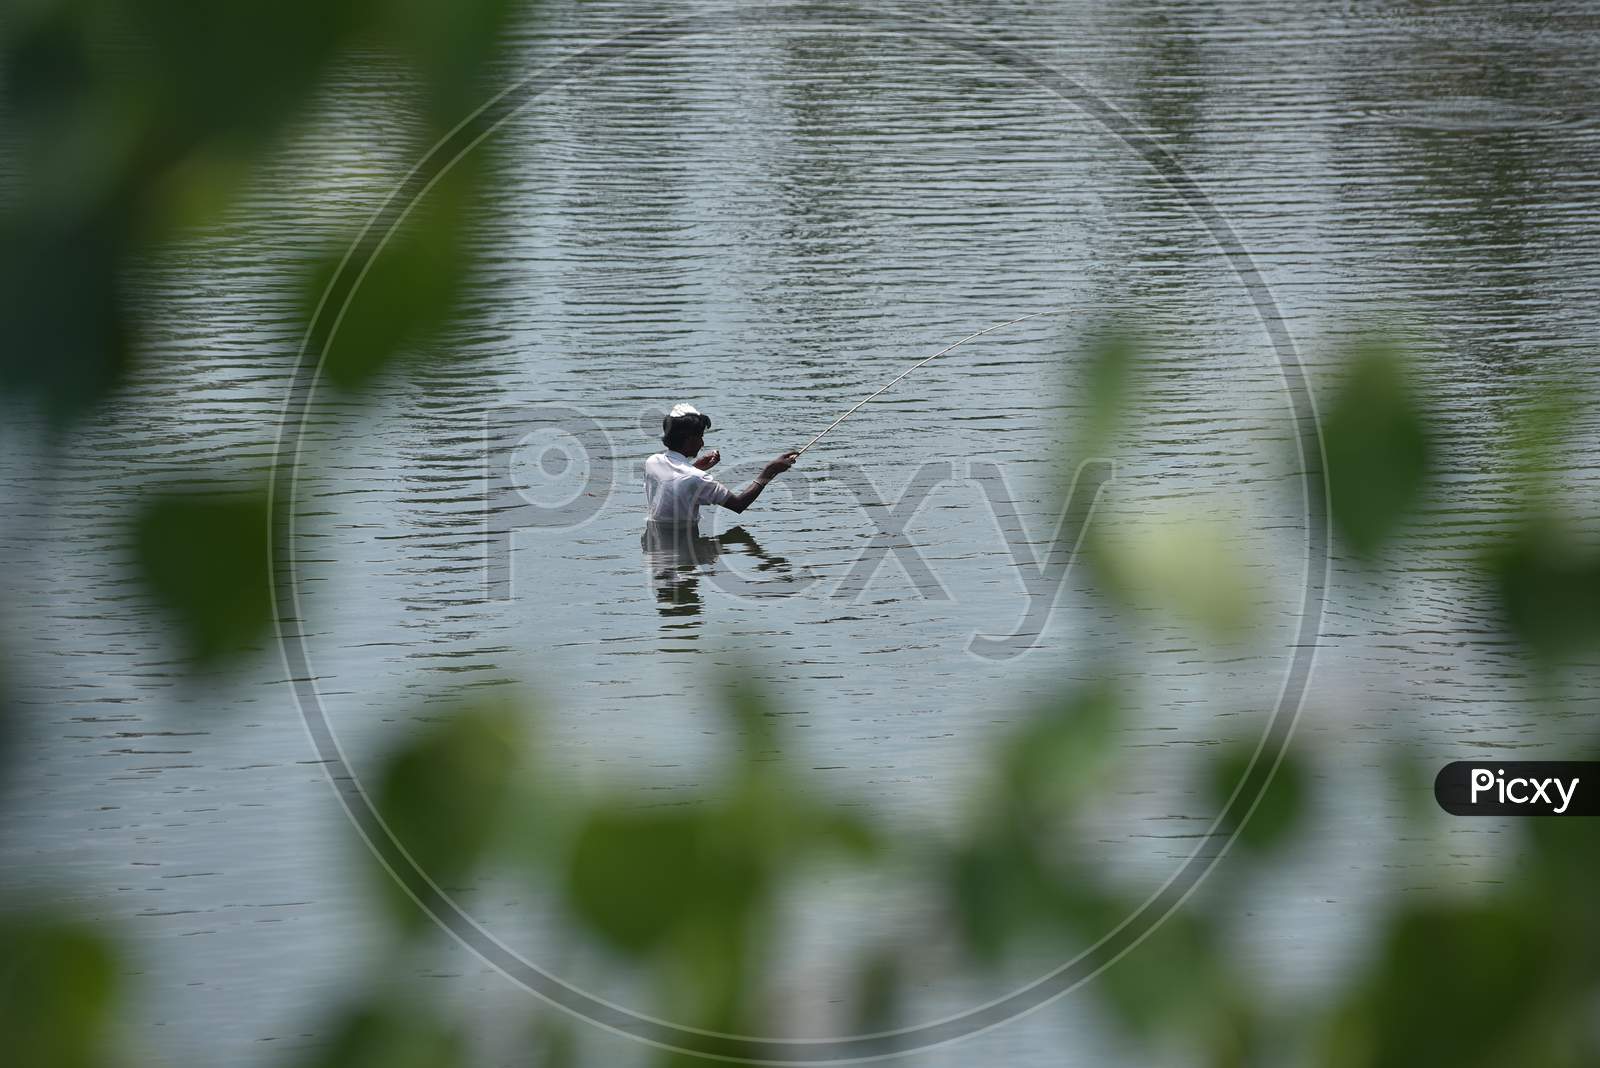 A Local Catches Fish At The Rivas Canal During The Nationwide Lockdown Amid Coronavirus Pandemic In Vijayawada.